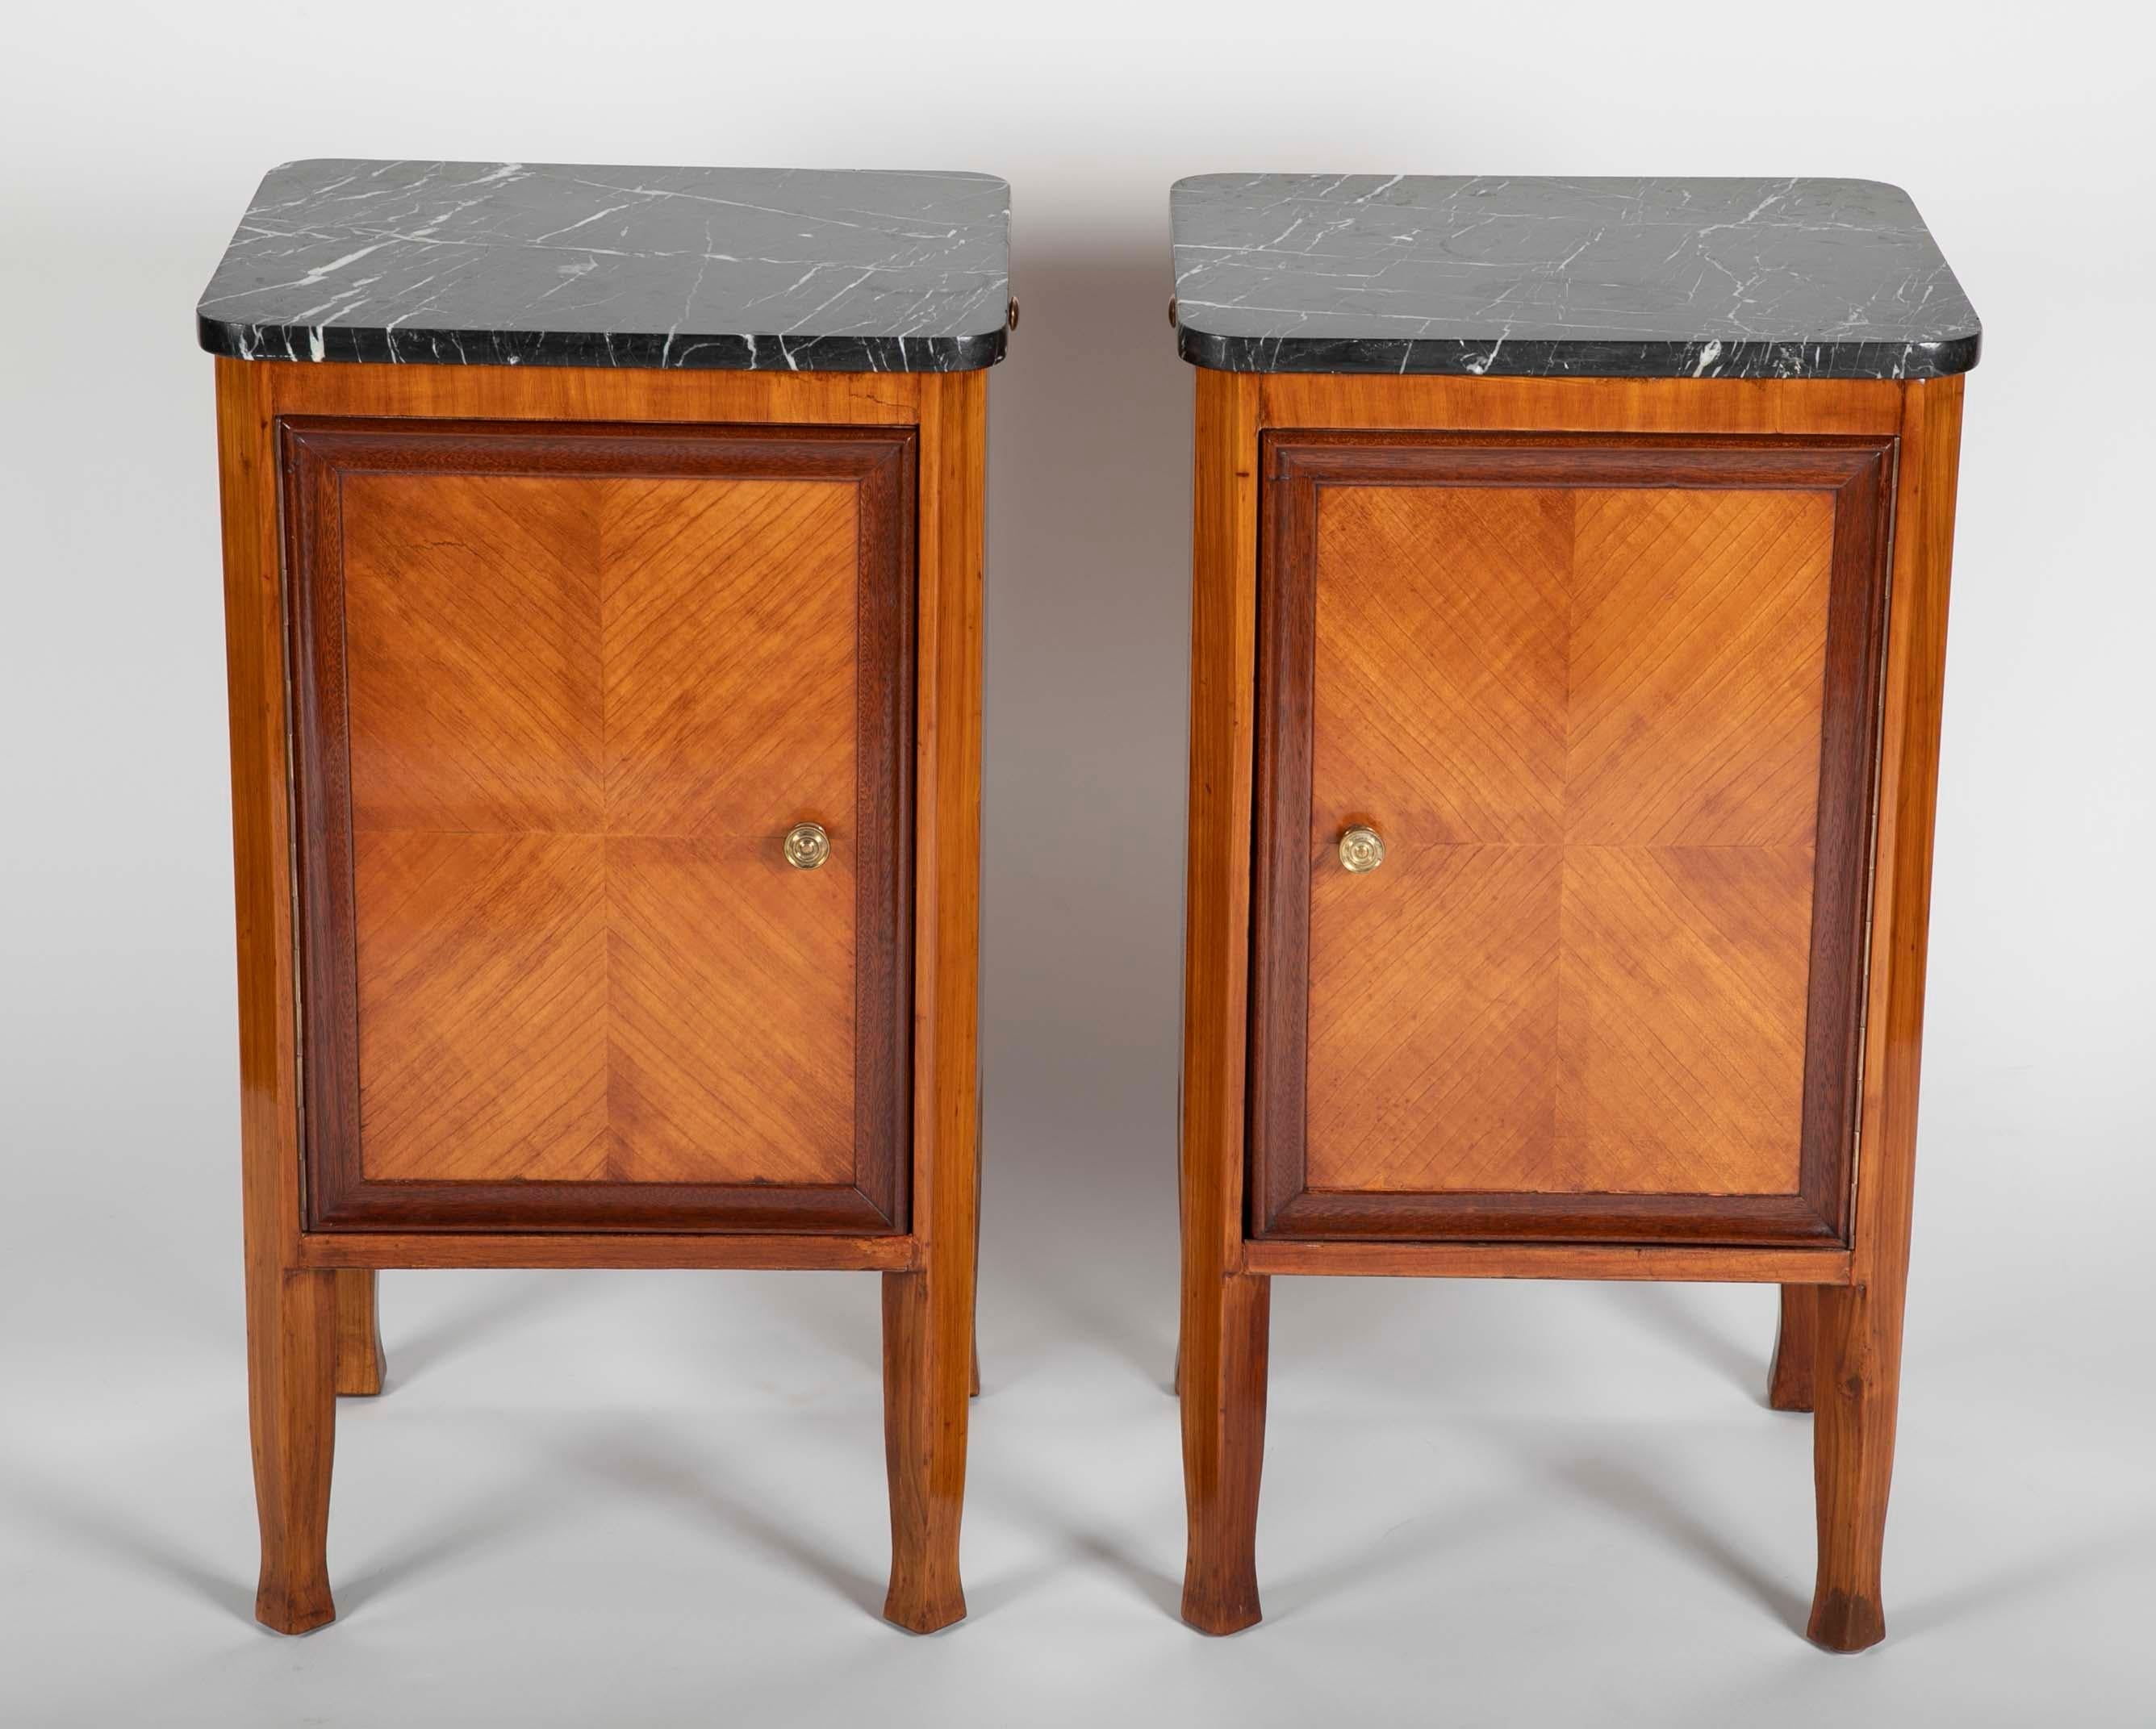 A very handsome pair of Italian midcentury night stands in the neoclassical style with black and white marble tops. The door of each cabinet opening in the opposite direction with a single shelf inside. A nice detail of these bedside cabinets is the